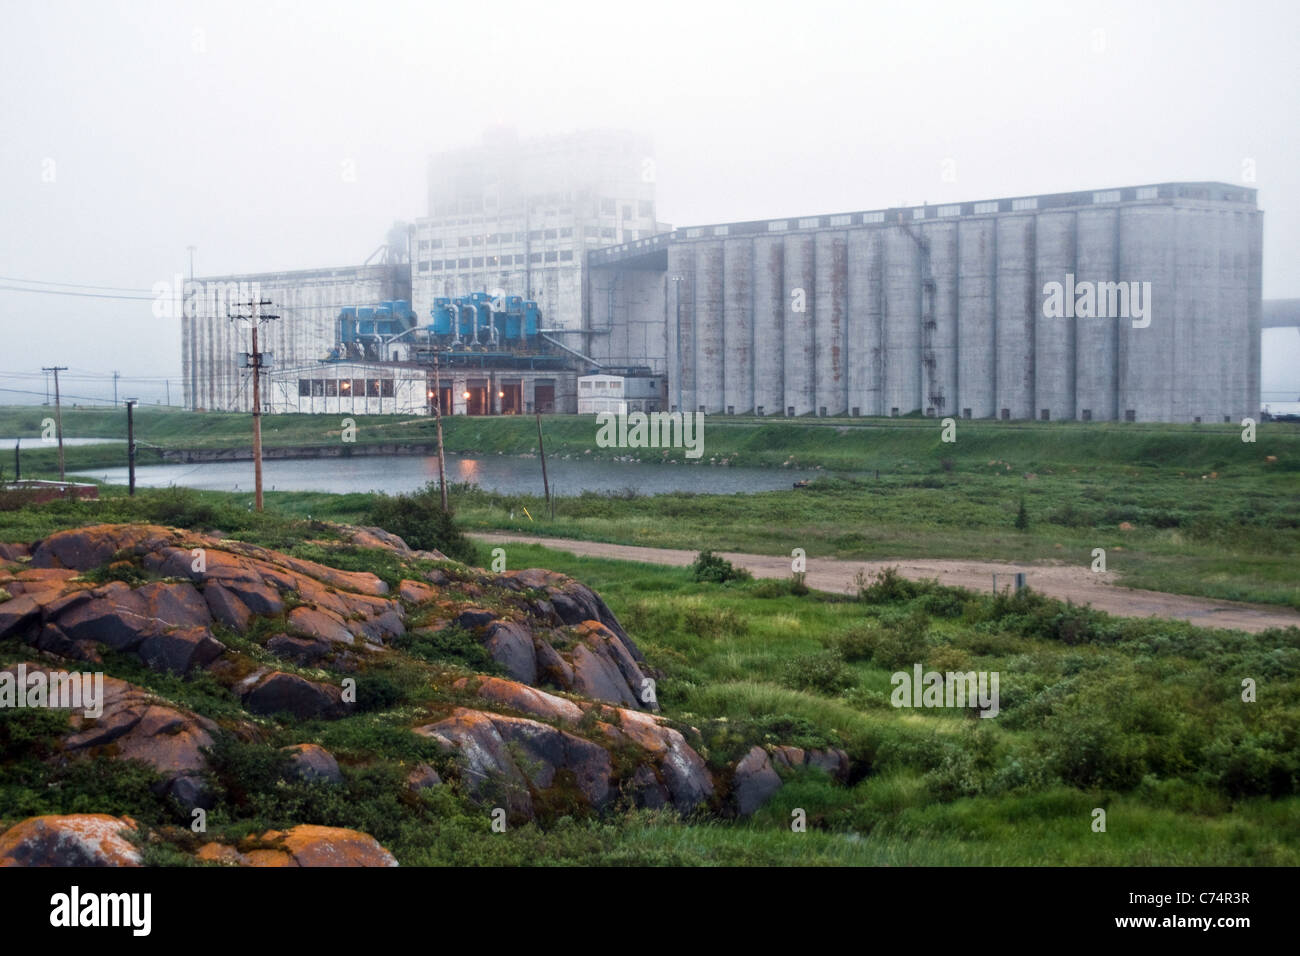 The grain silos and elevators at the shipping facility at the Port of Churchill, on Hudson Bay in the Arctic Ocean, in northern Manitoba, Canada. Stock Photo